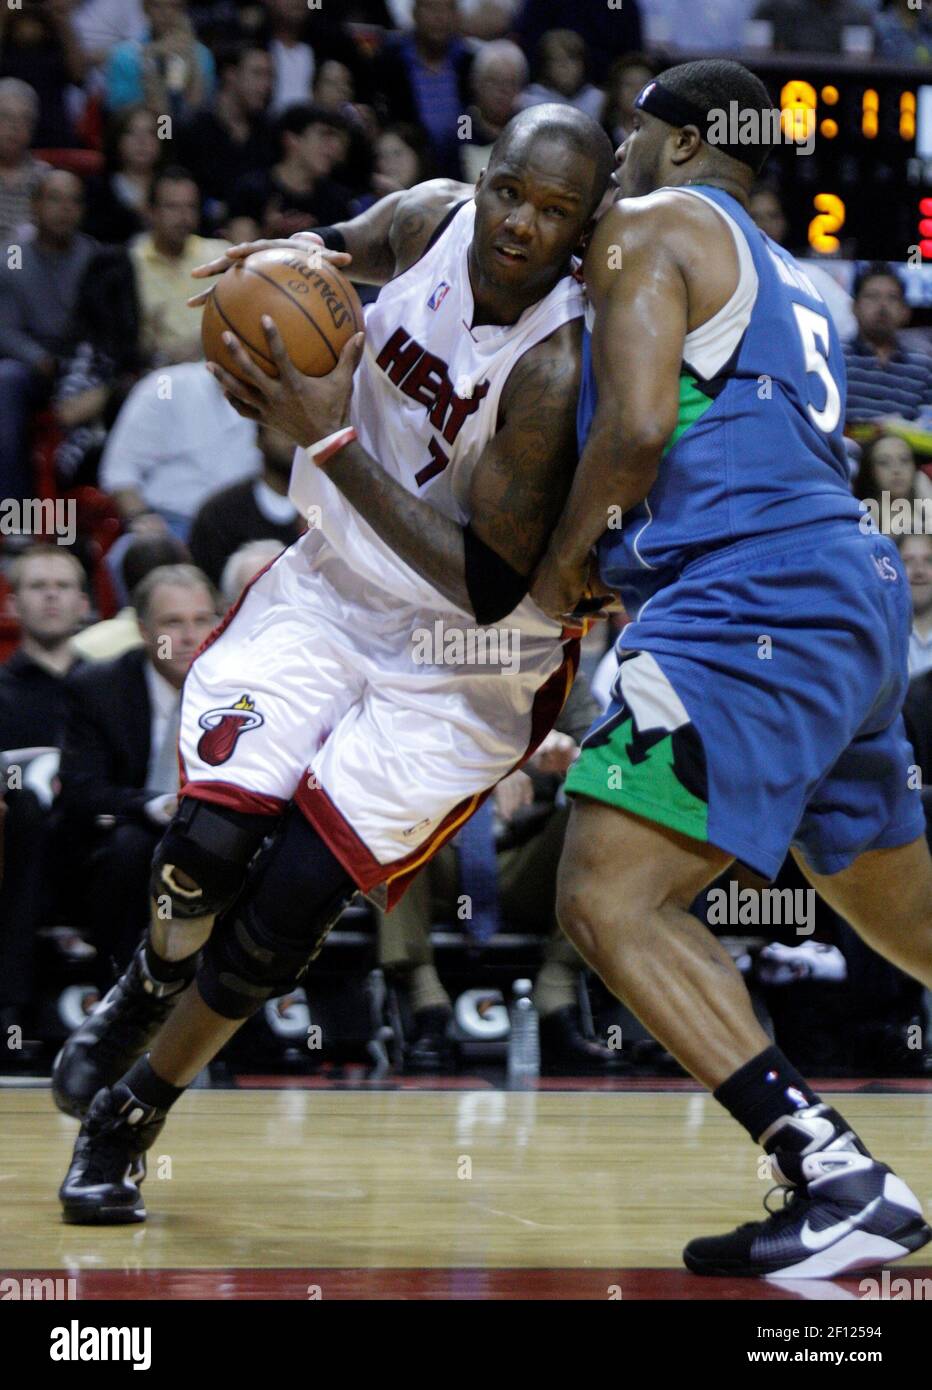 Miami Heat's Jermaine O'Neal drives to the basket against the